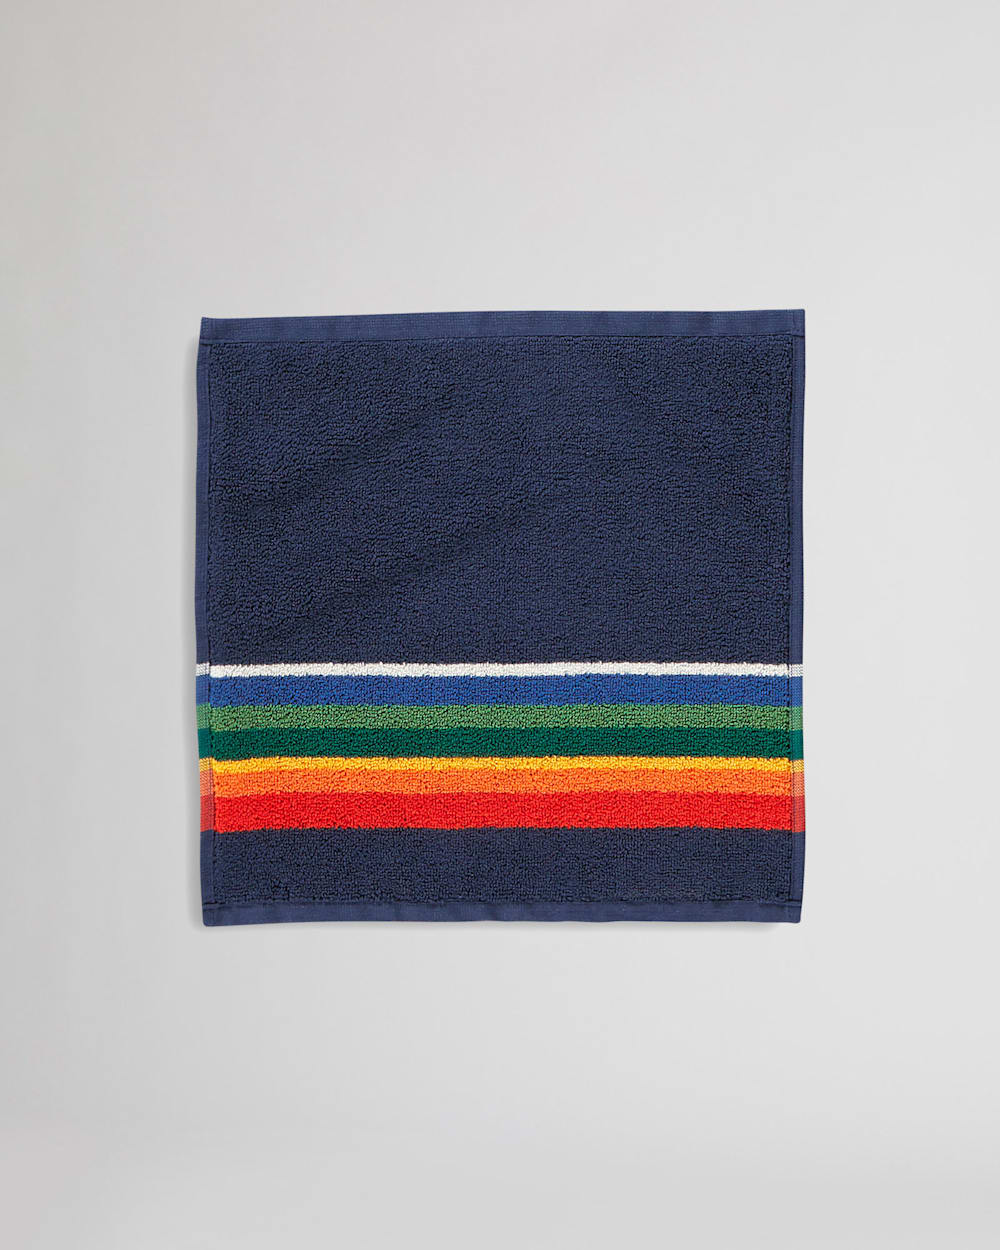 ALTERNATE VIEW OF CRATER LAKE NATIONAL PARK TOWEL SET IN NAVY image number 6